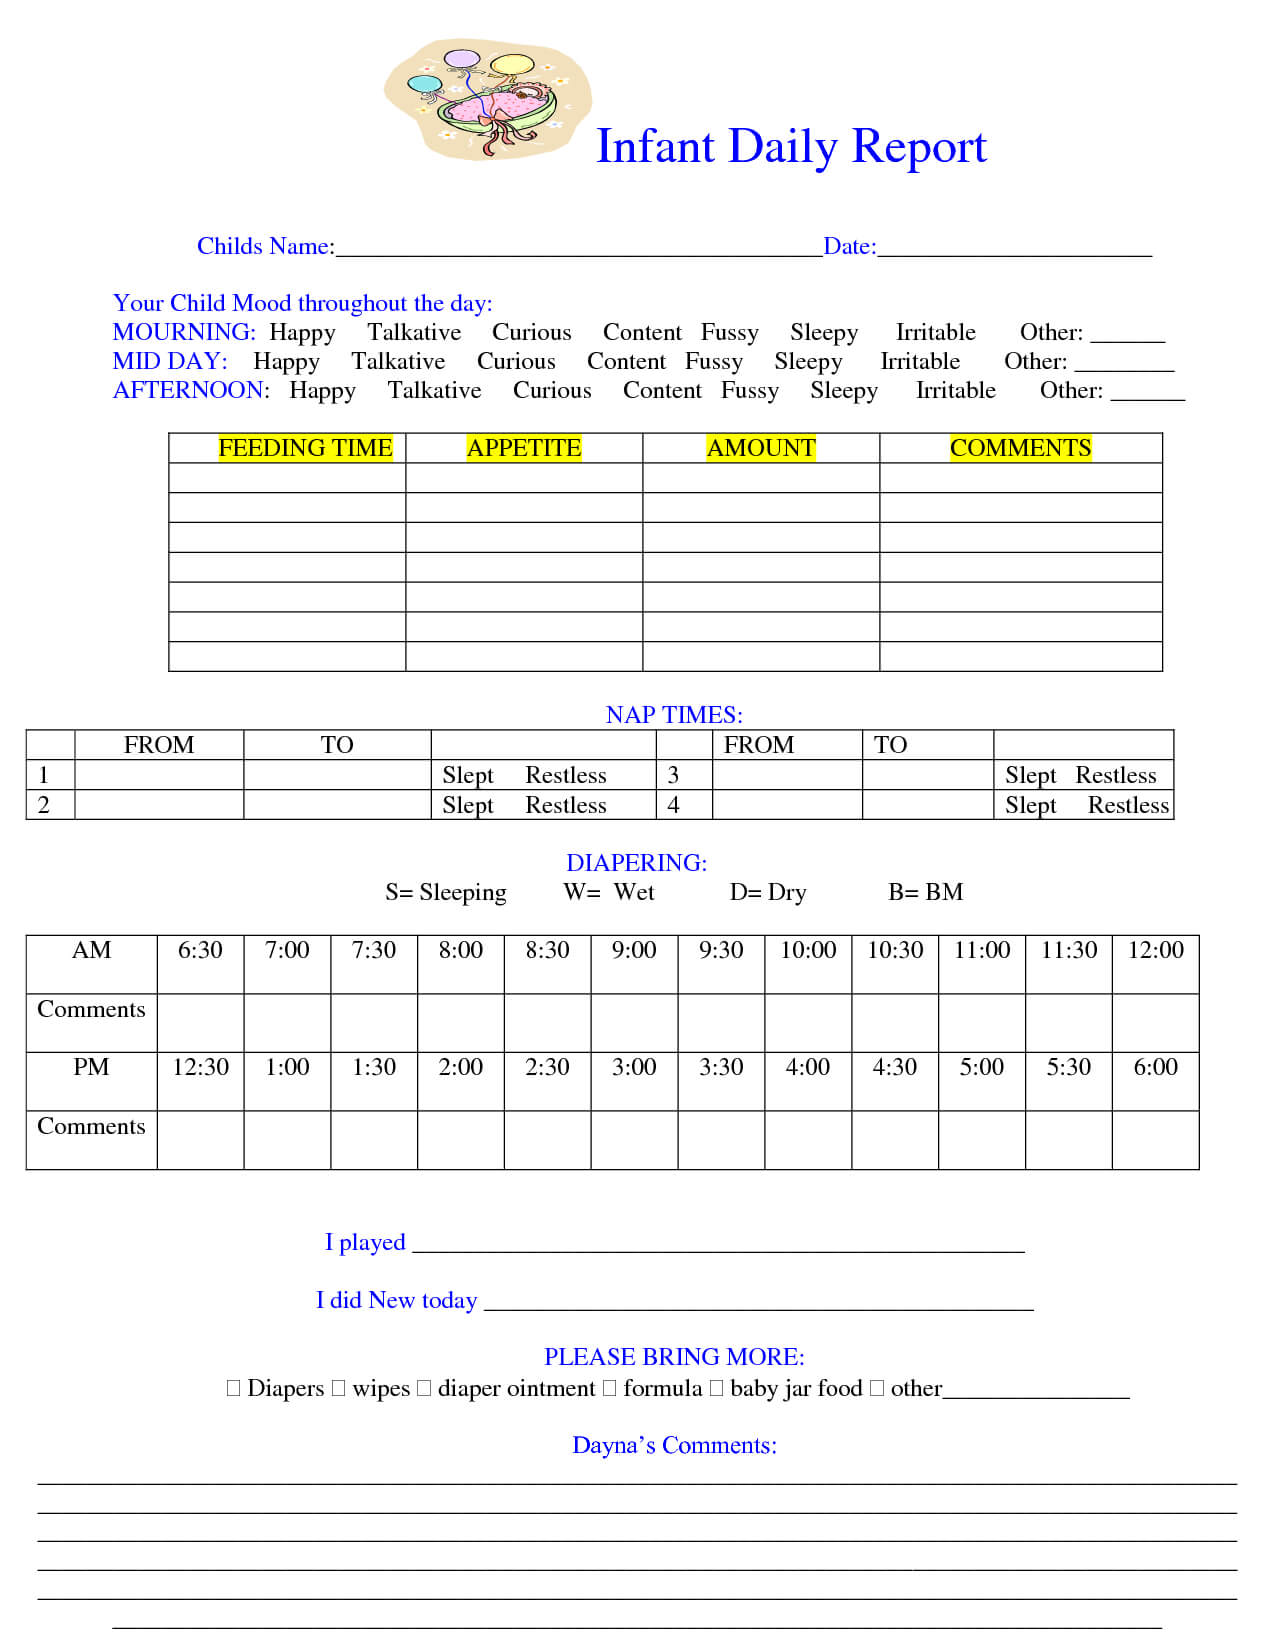 free-printable-infant-daycare-forms